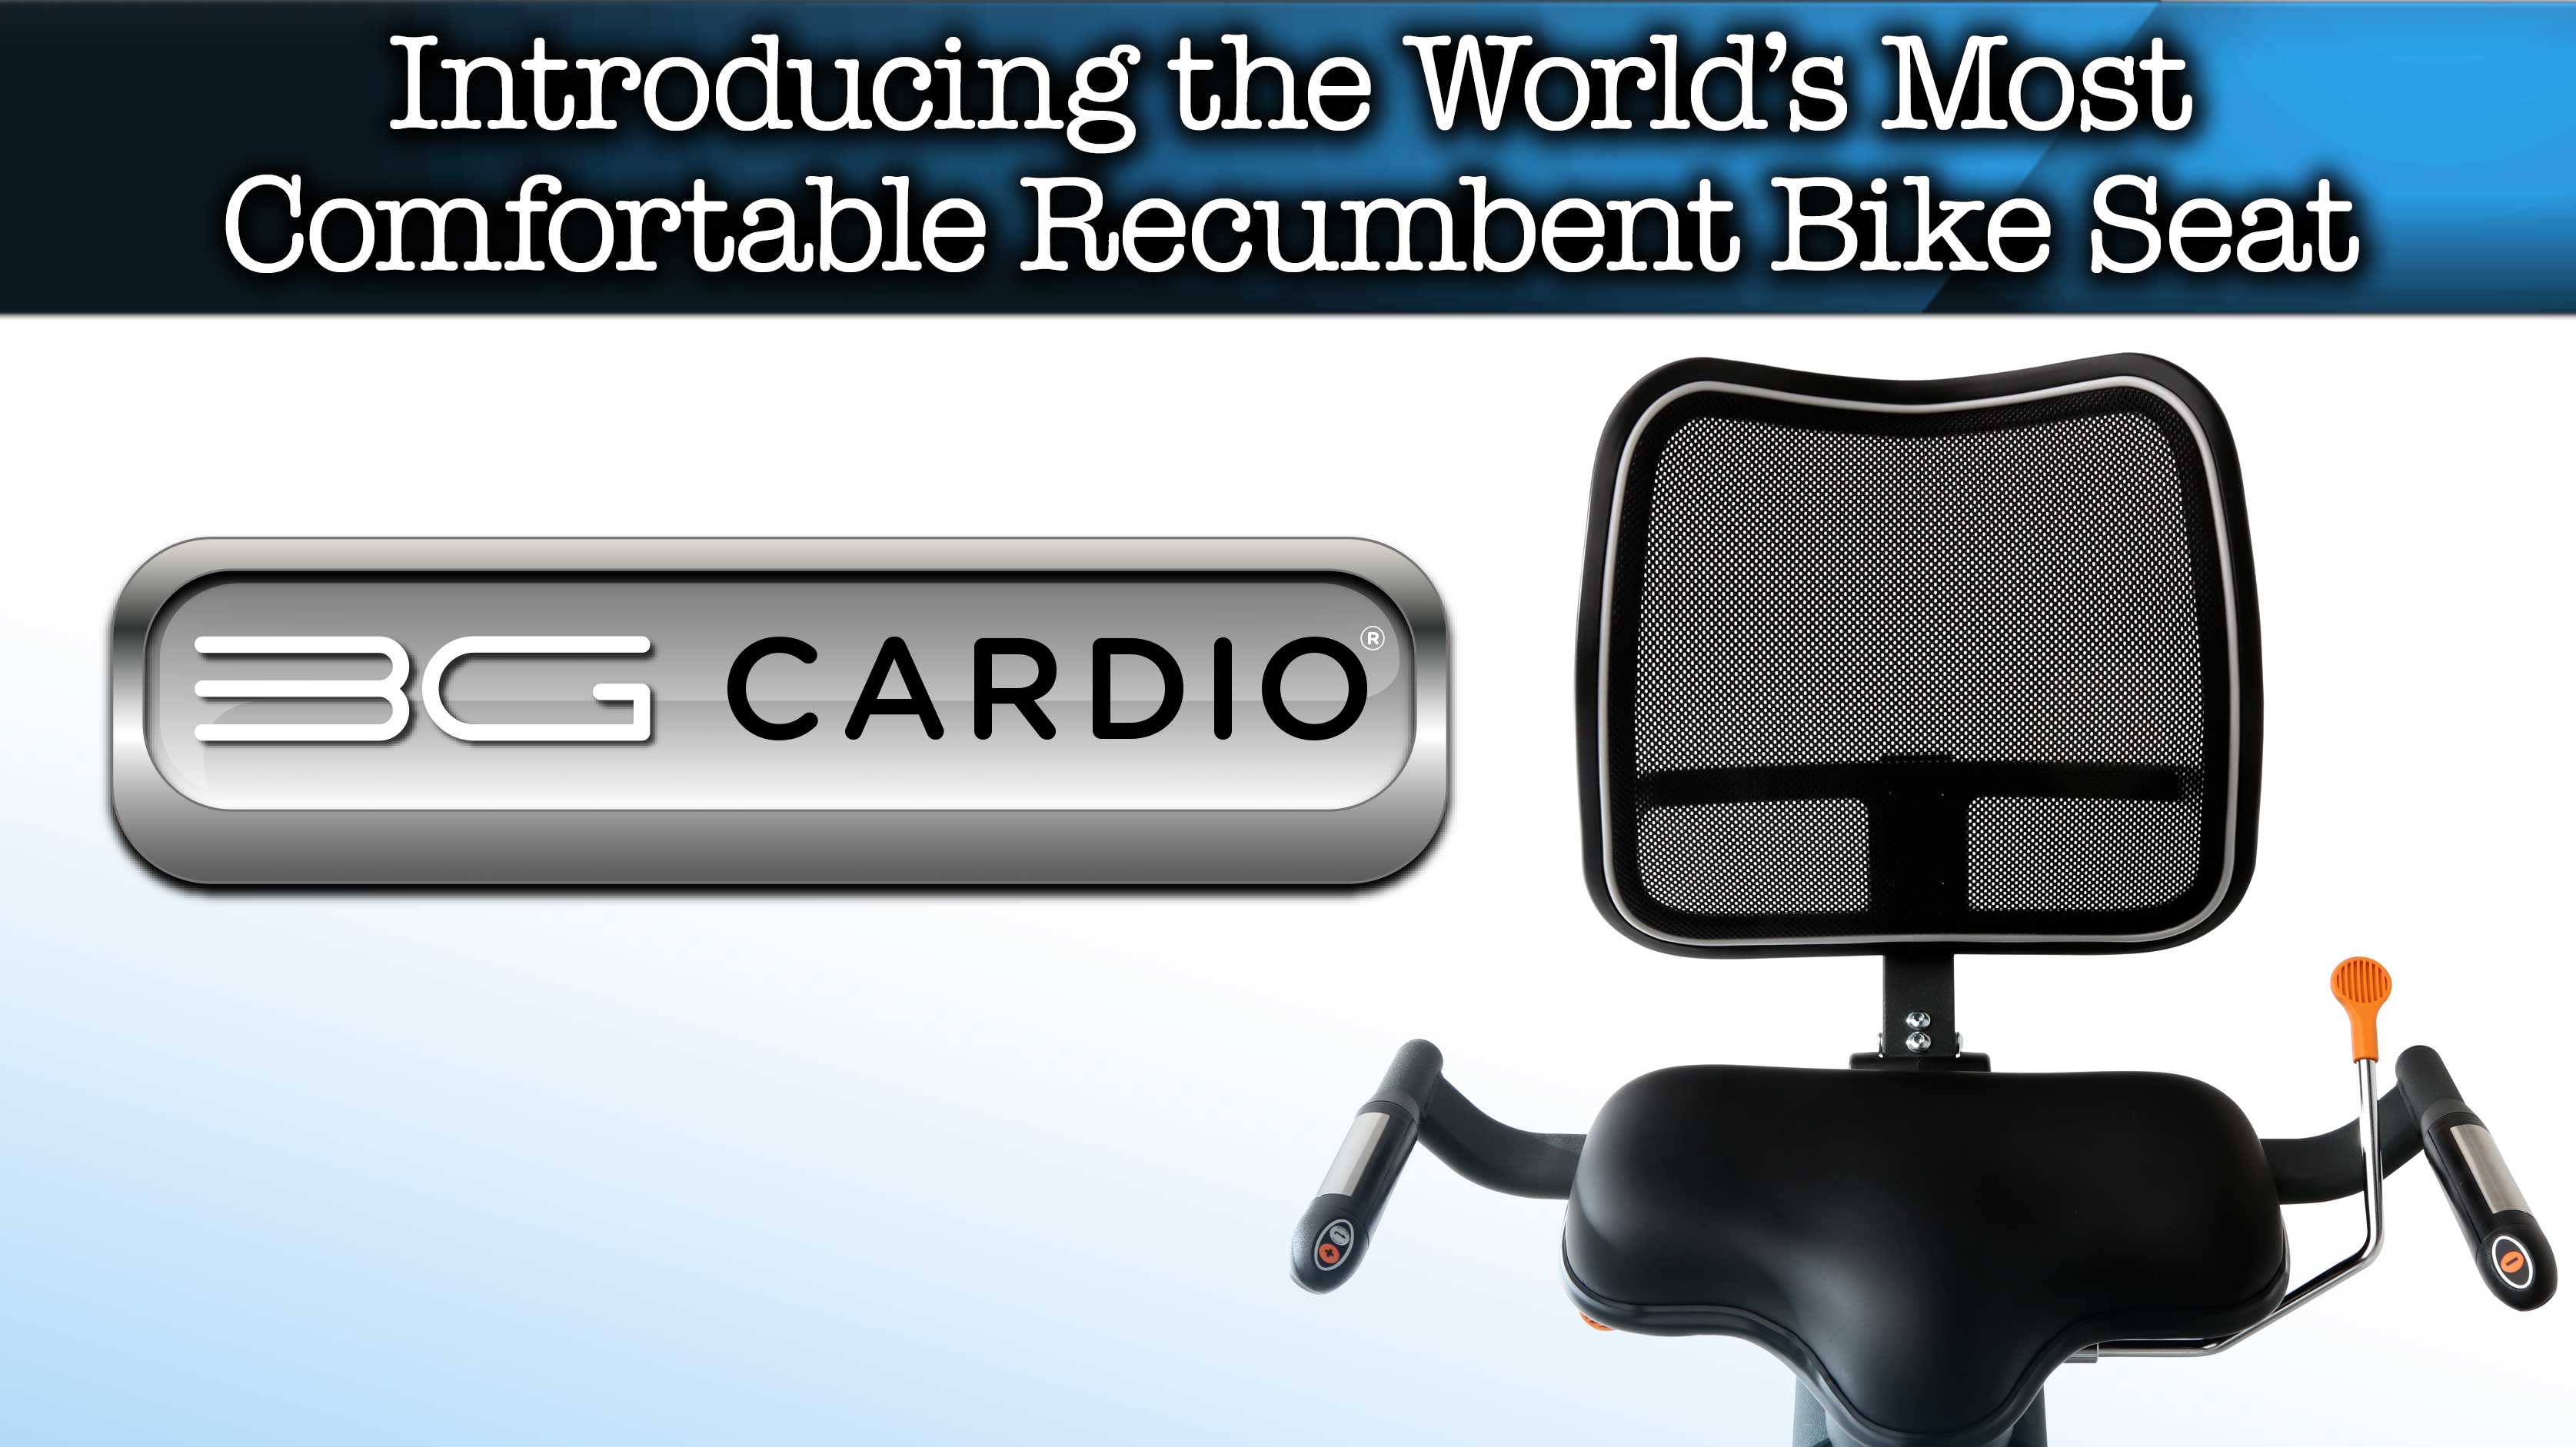 What is the most comfortable exercise bike seat?